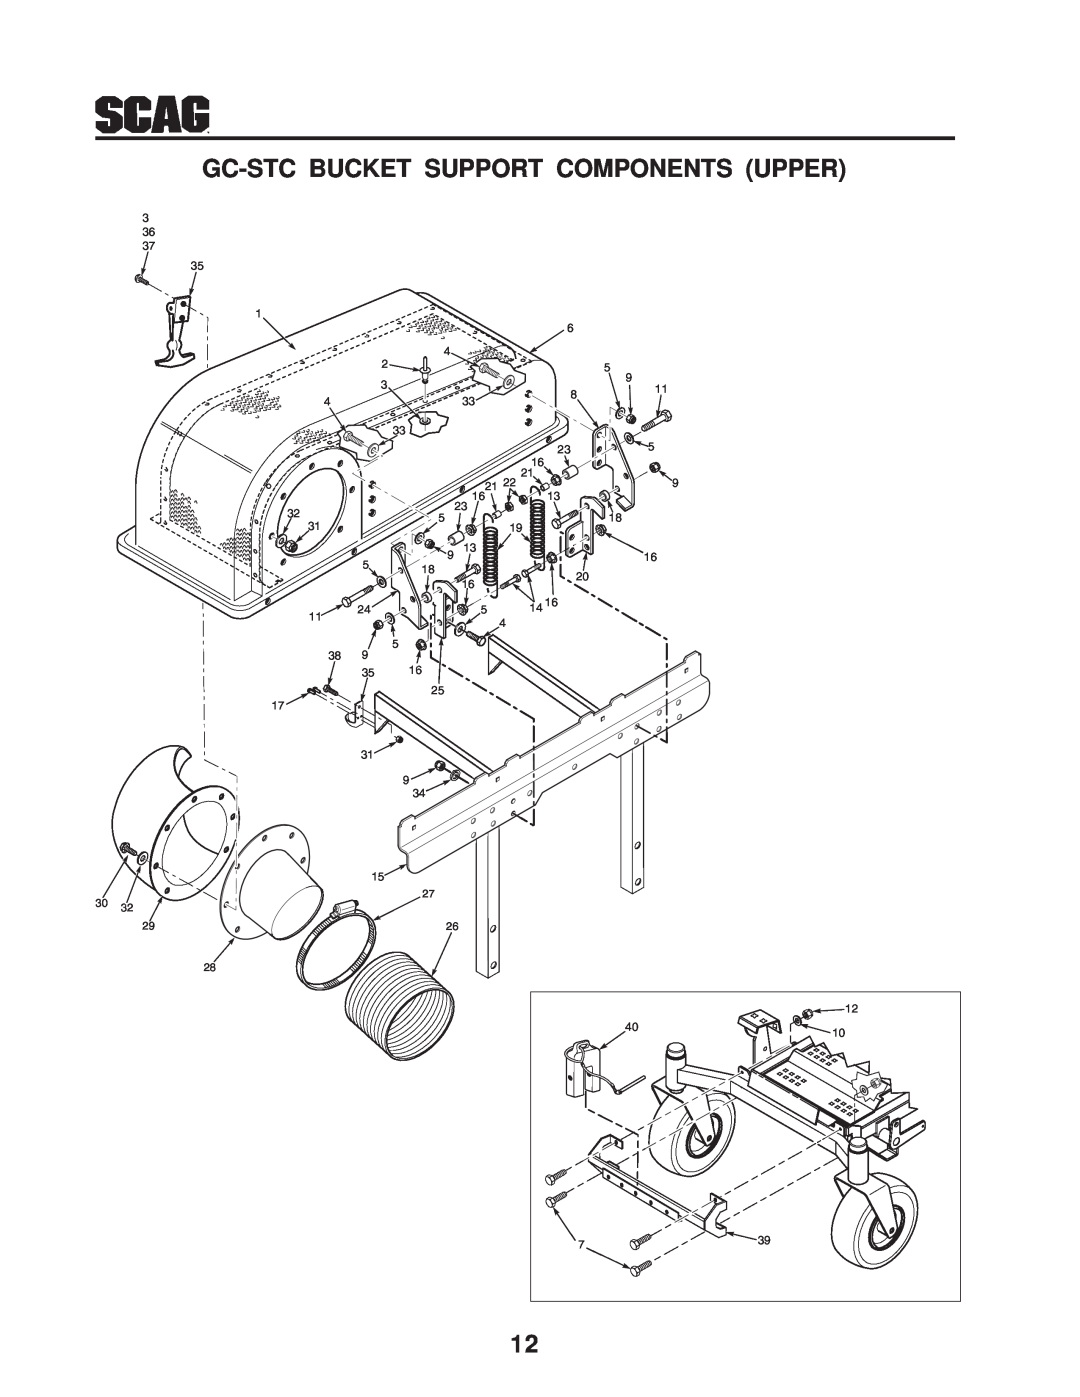 Scag Power Equipment GC-STC-V operating instructions Gc-Stc Bucket Support Components Upper 